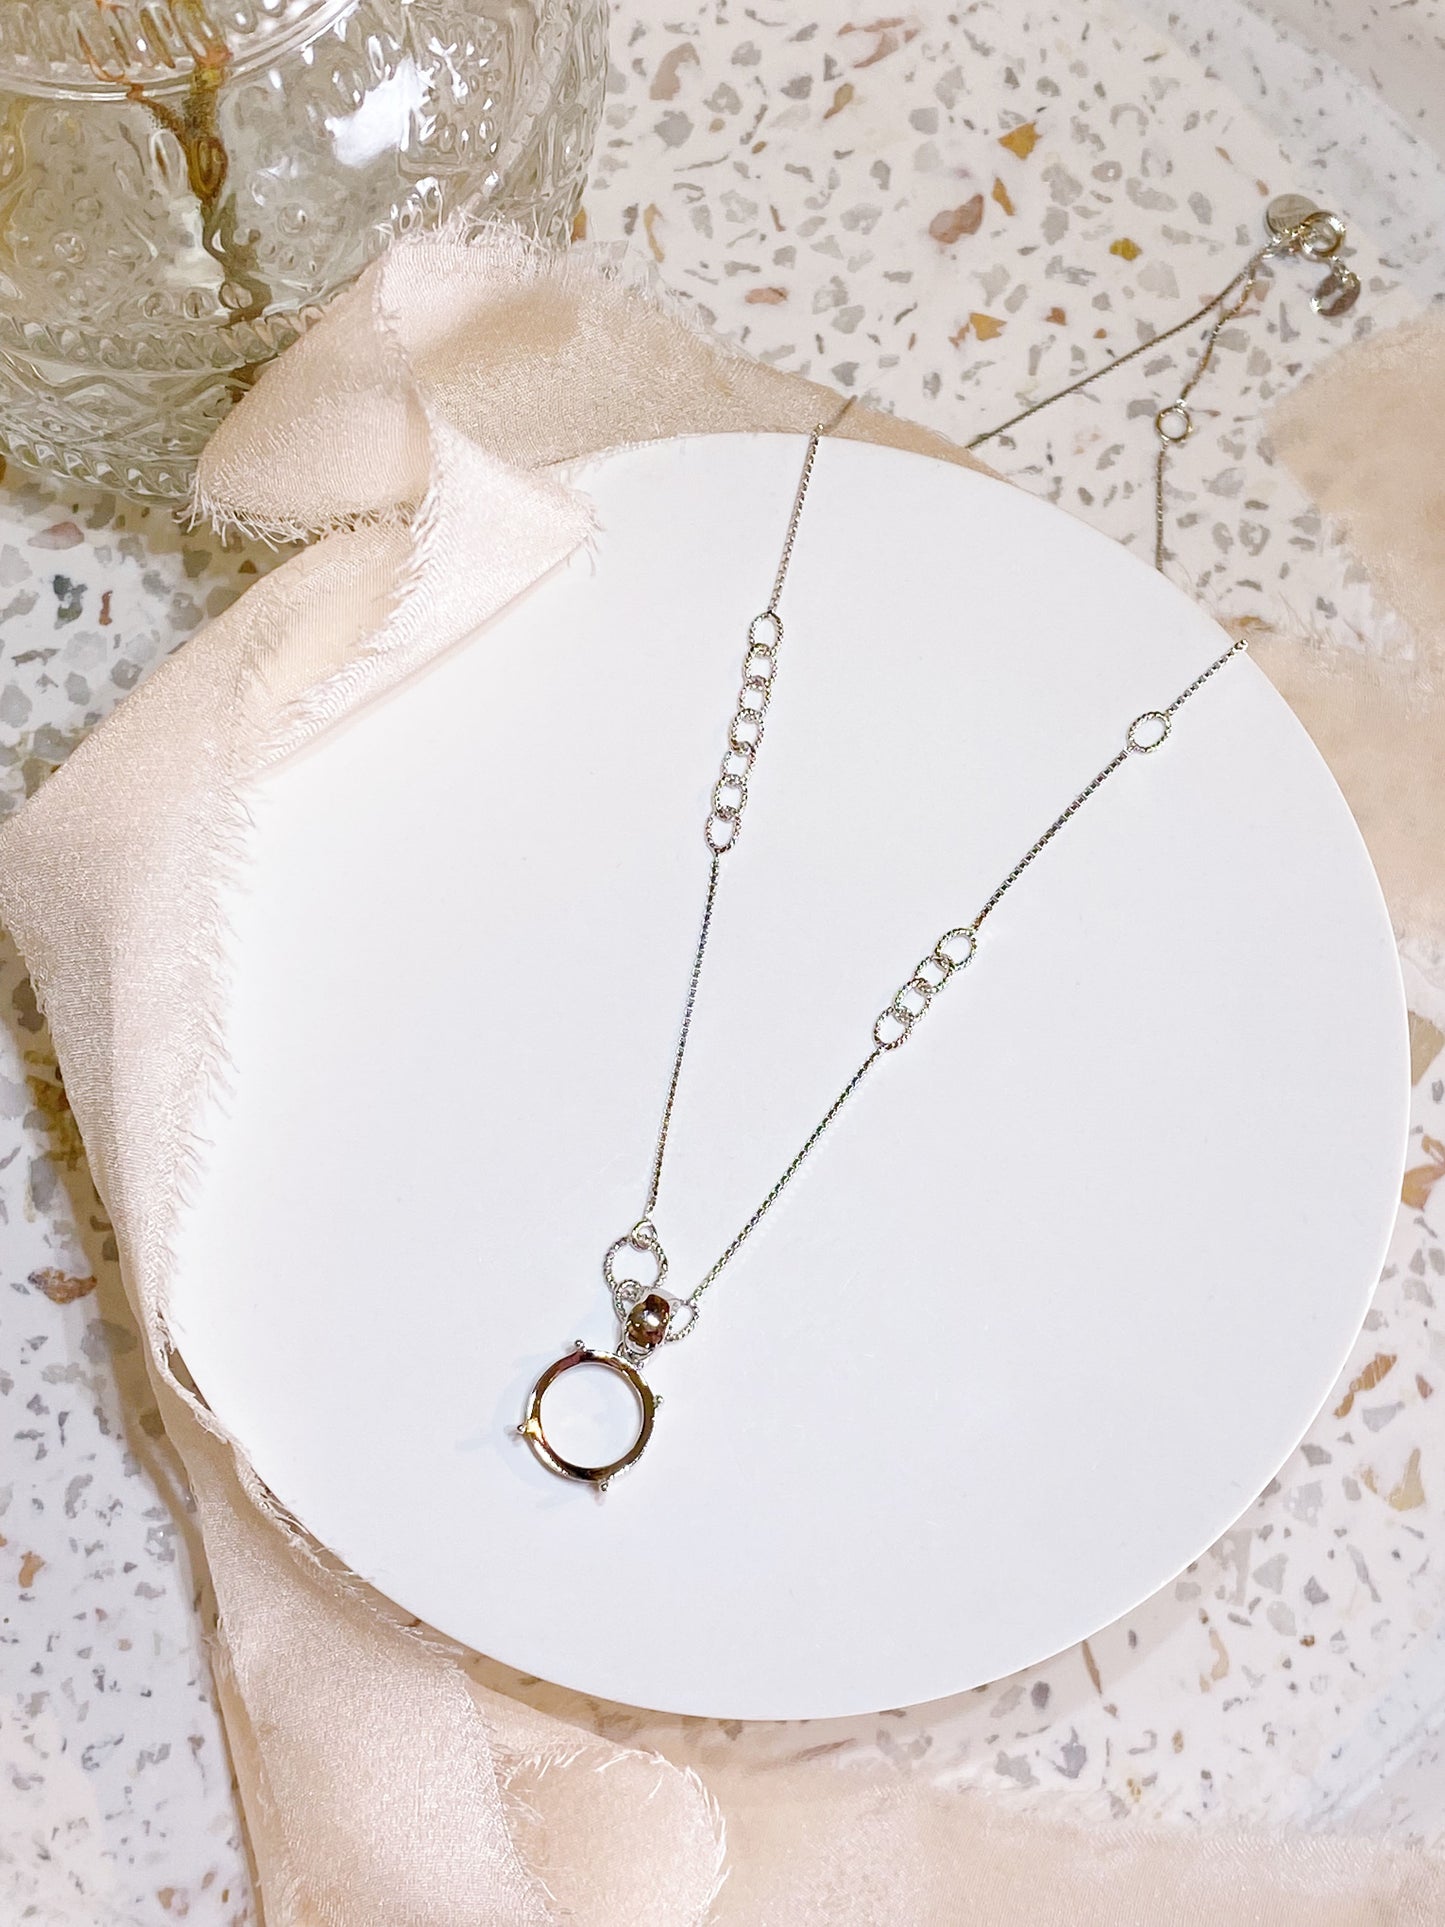 BreastmilkGems™ DIY kit with 2 Twisted Rings Necklace set